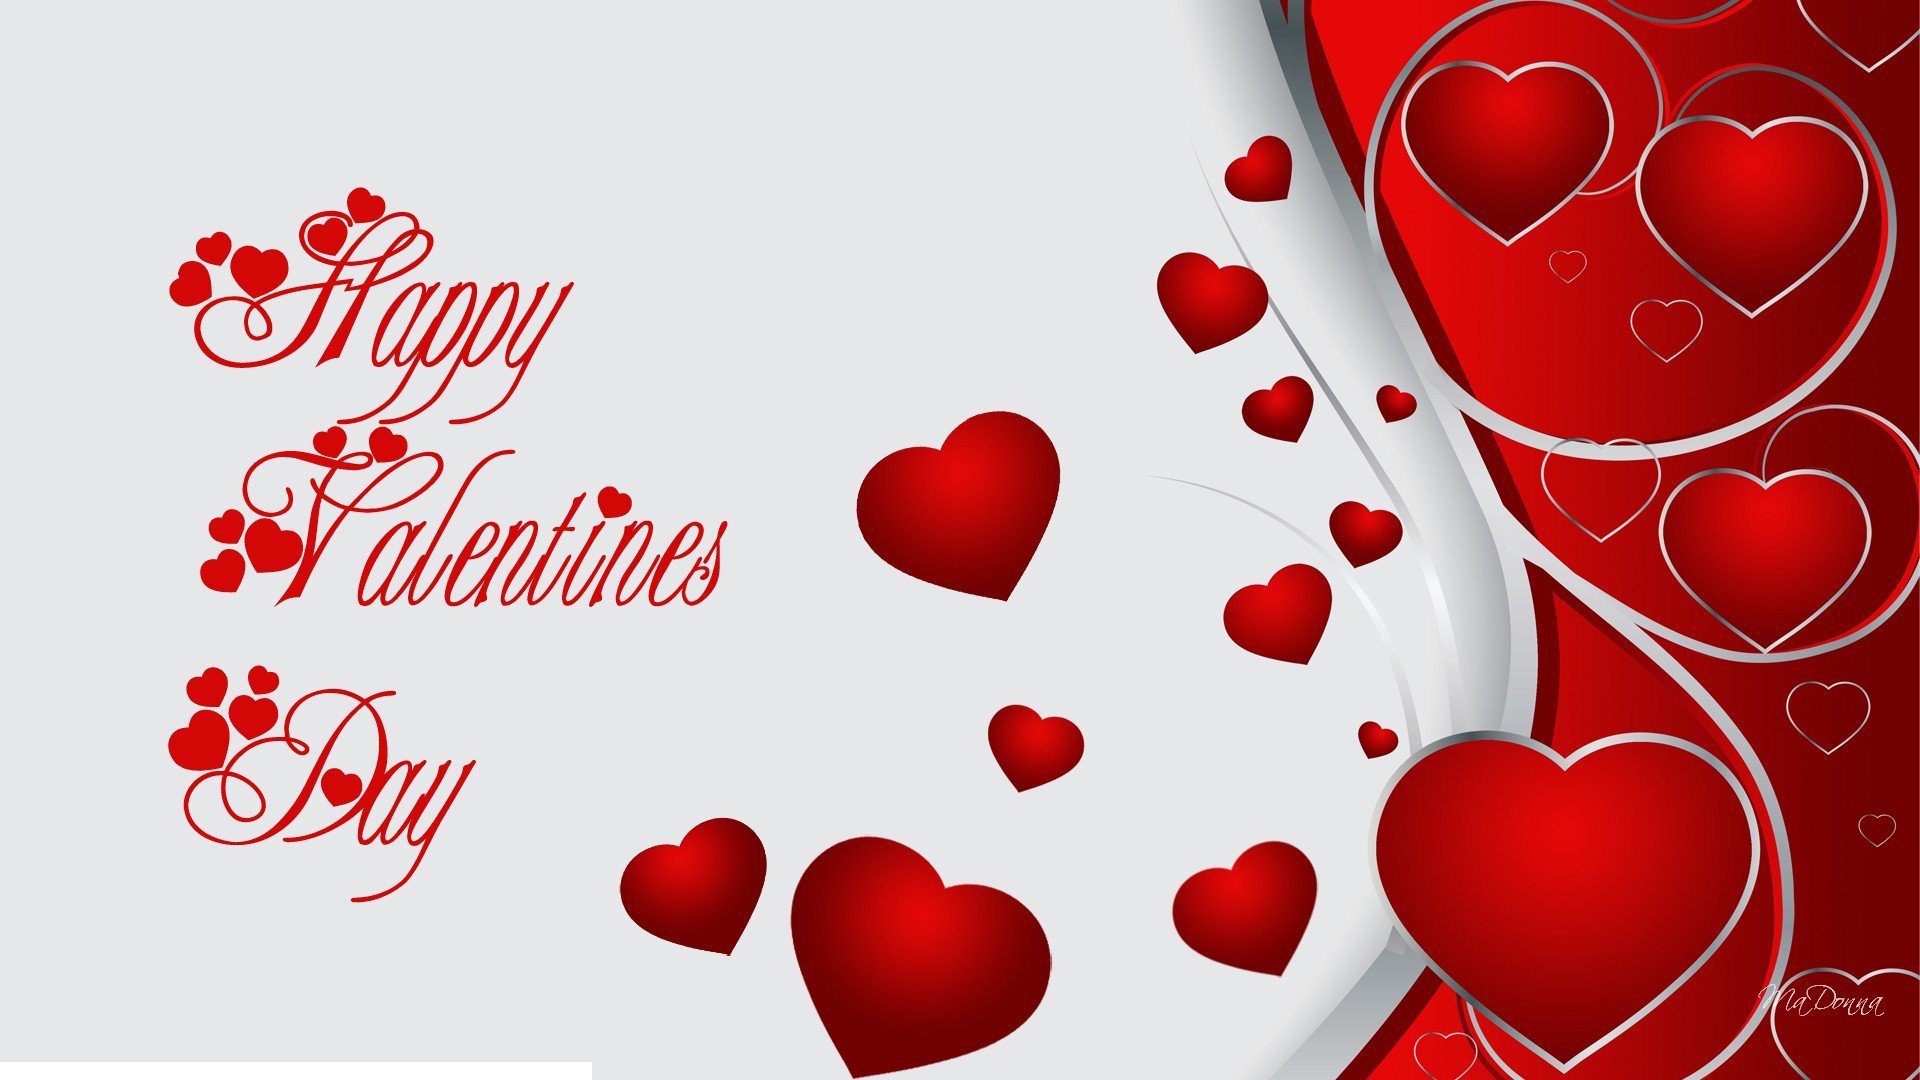 [10 Best] Valentine s Day PC Wallpapers to Make the Mood